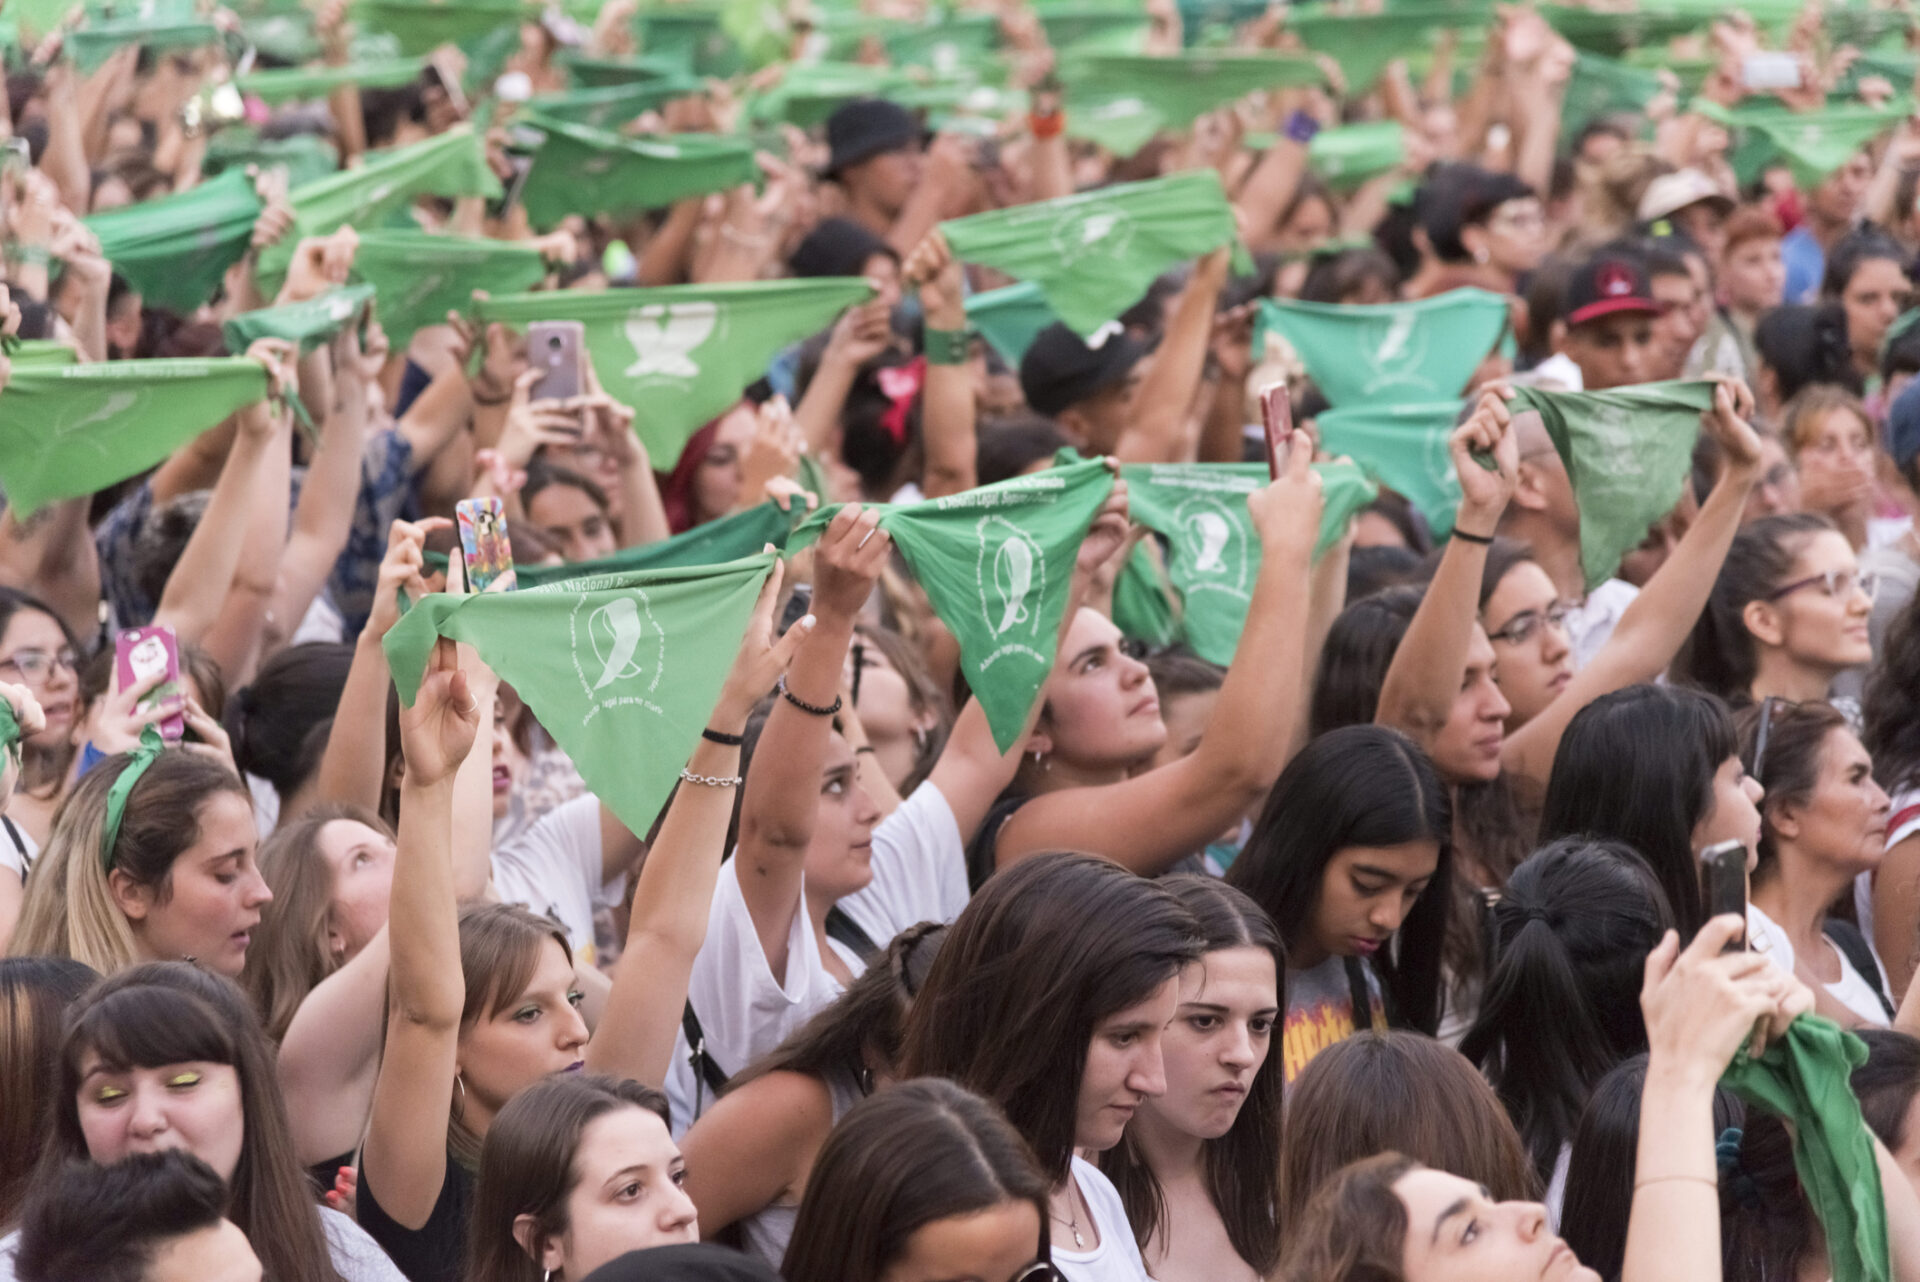 Capital Federal, Buenos Aires / Argentina; Feb 19, 2020: Women at a rally raise green handkerchiefs, a symbol of support for legal, safe, and free abortion in Latin America. 